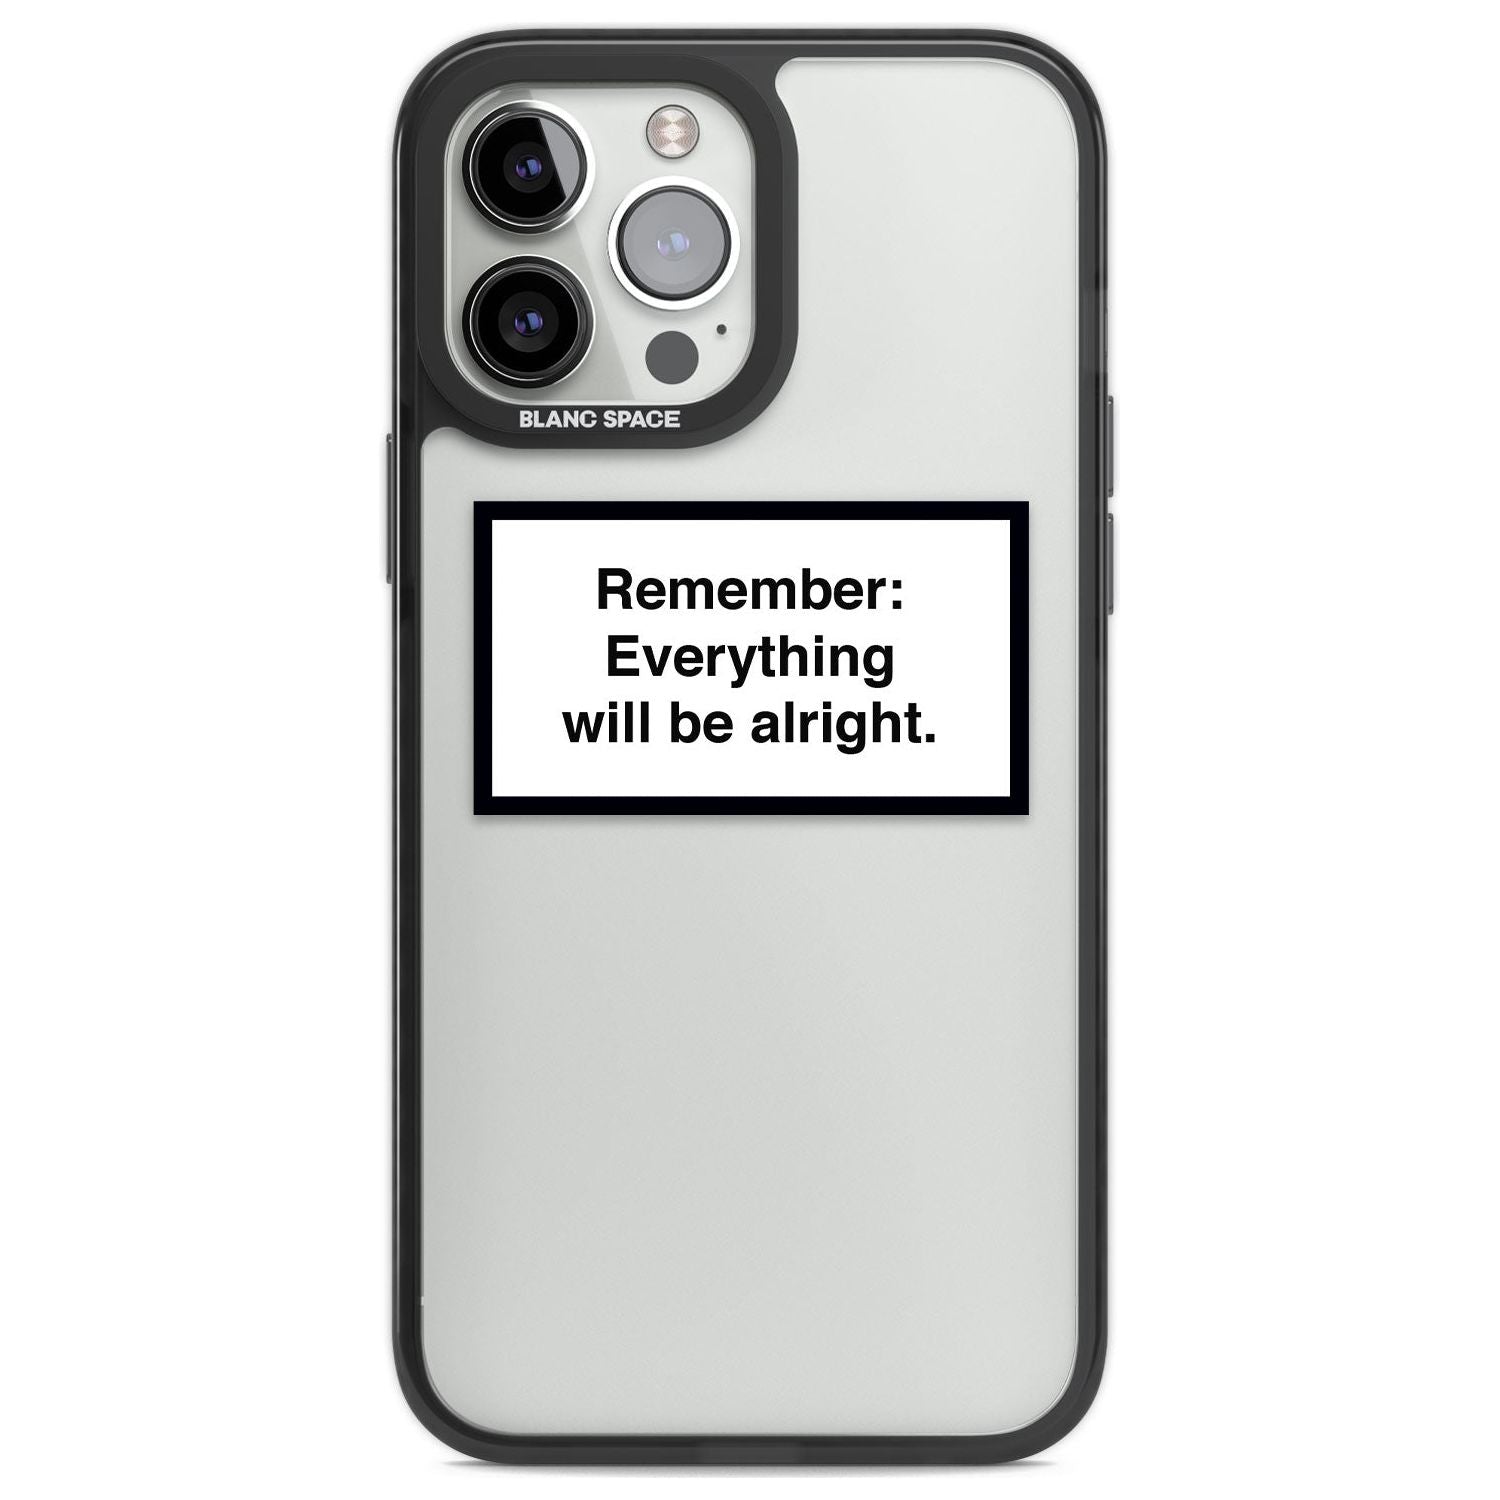 Everything Will Be Alright Phone Case iPhone 13 Pro Max / Black Impact Case,iPhone 14 Pro Max / Black Impact Case Blanc Space